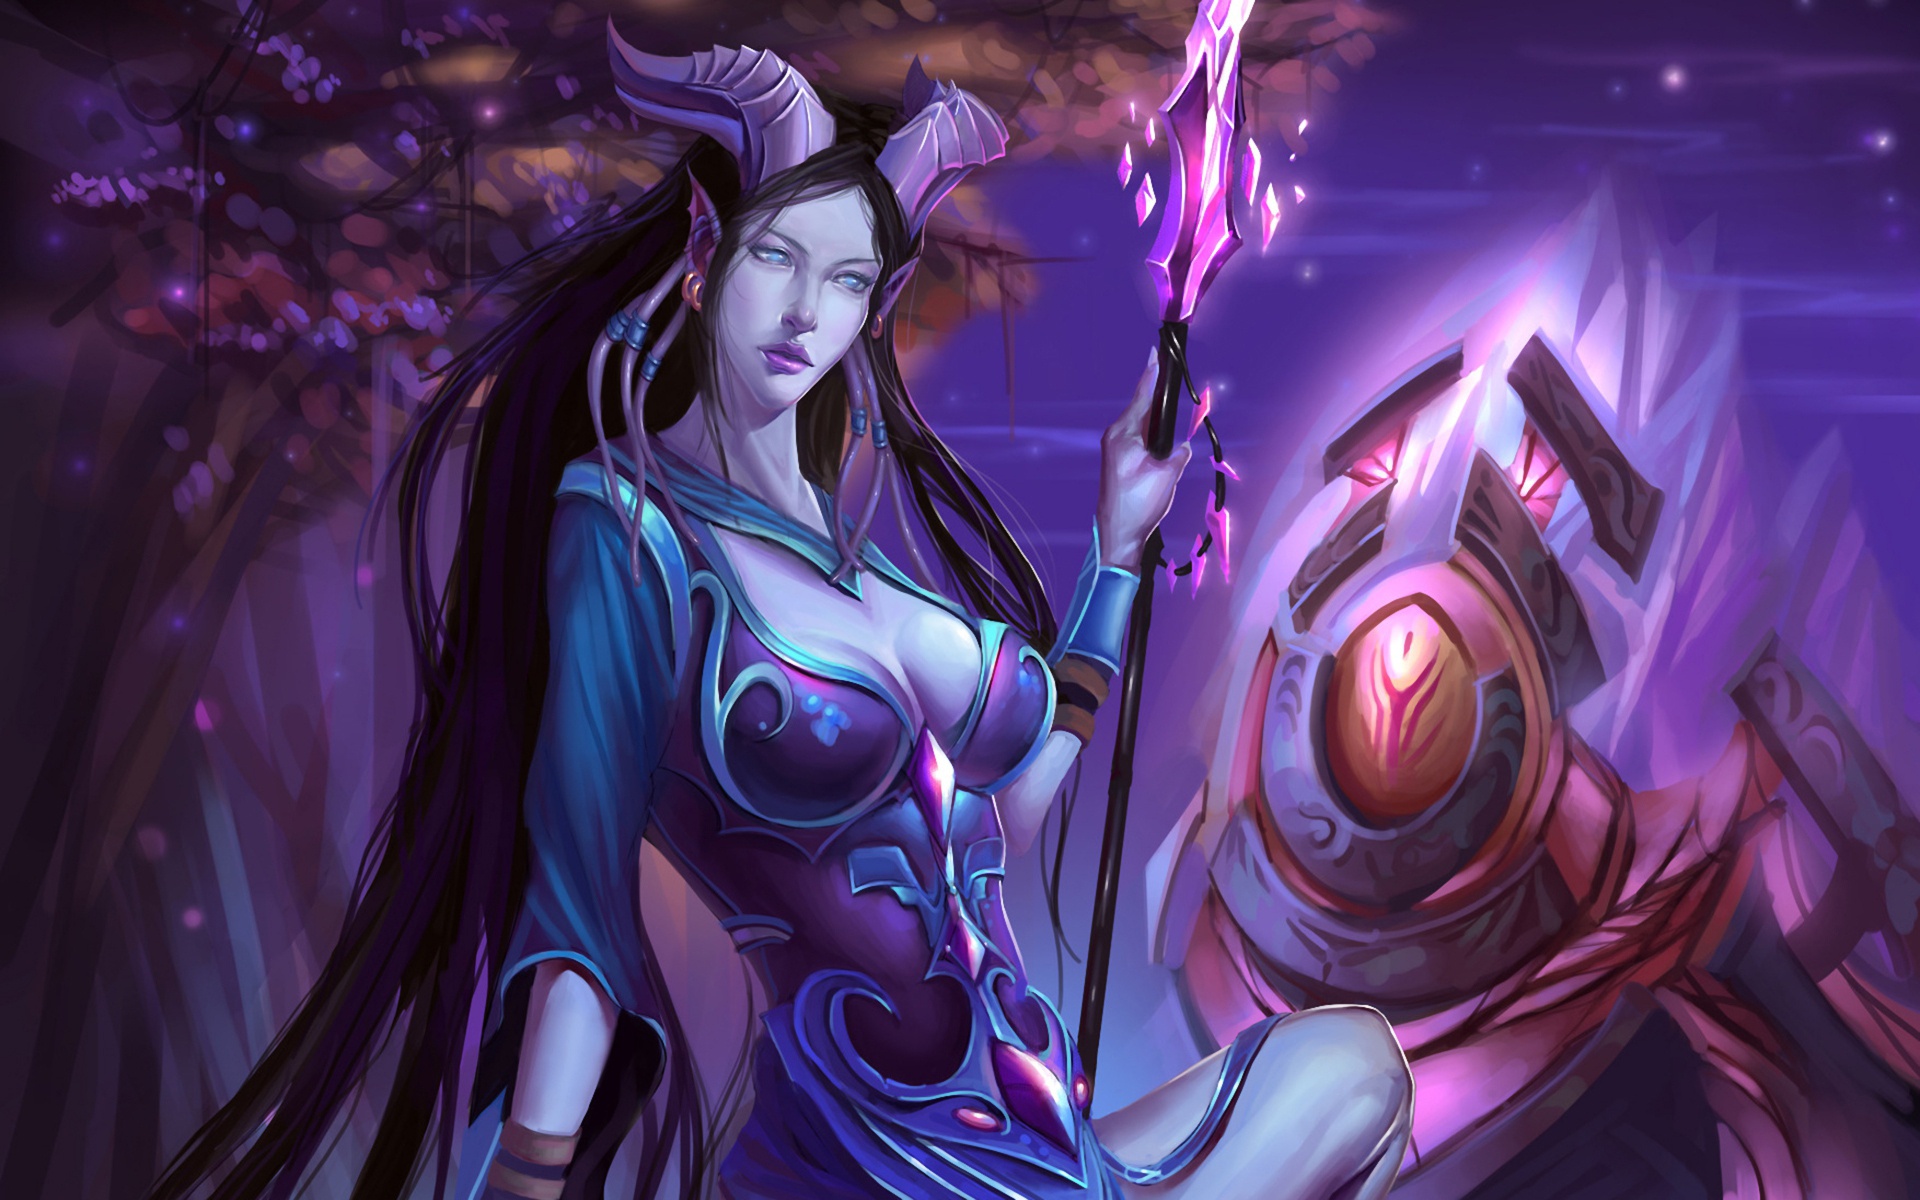 Draenei Appreciation thread. They are so cool and badass. : r/wow